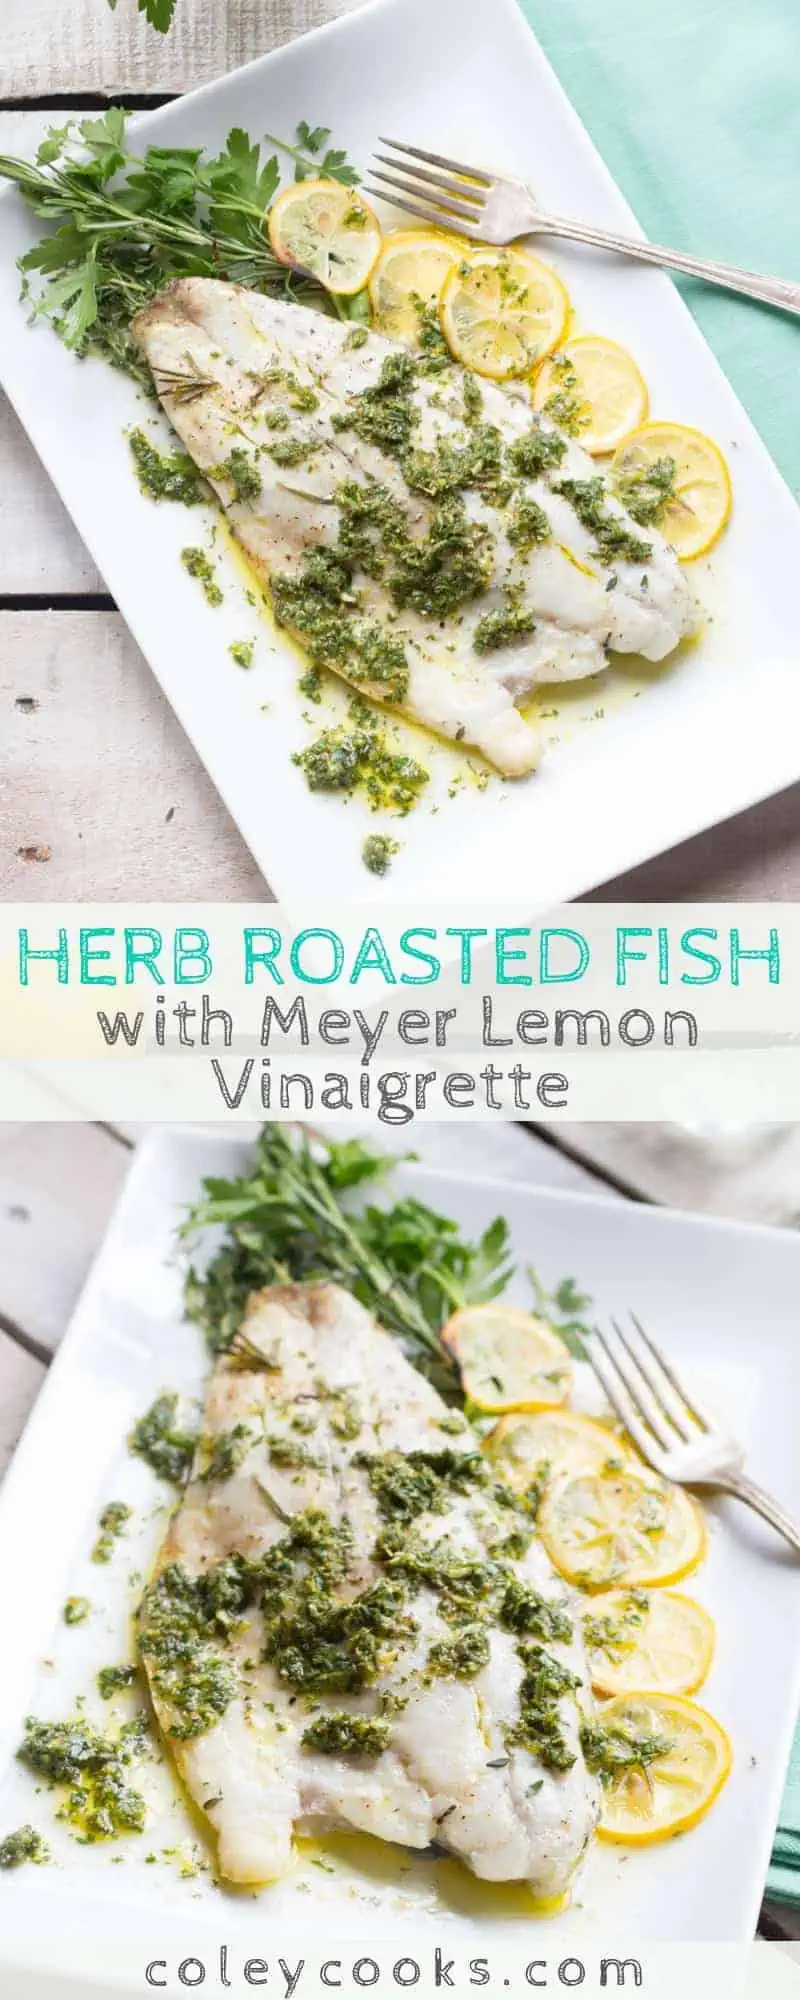 This easy recipe for Herb Roasted Fish with Meyer Lemon Vinaigrette is an easy, healthy recipe that can be made in 20 minutes! Adaptable to many different types of fish. #easy #fish #seafood #recipe #barramundi #meyerlemon #roasted | ColeyCooks.com